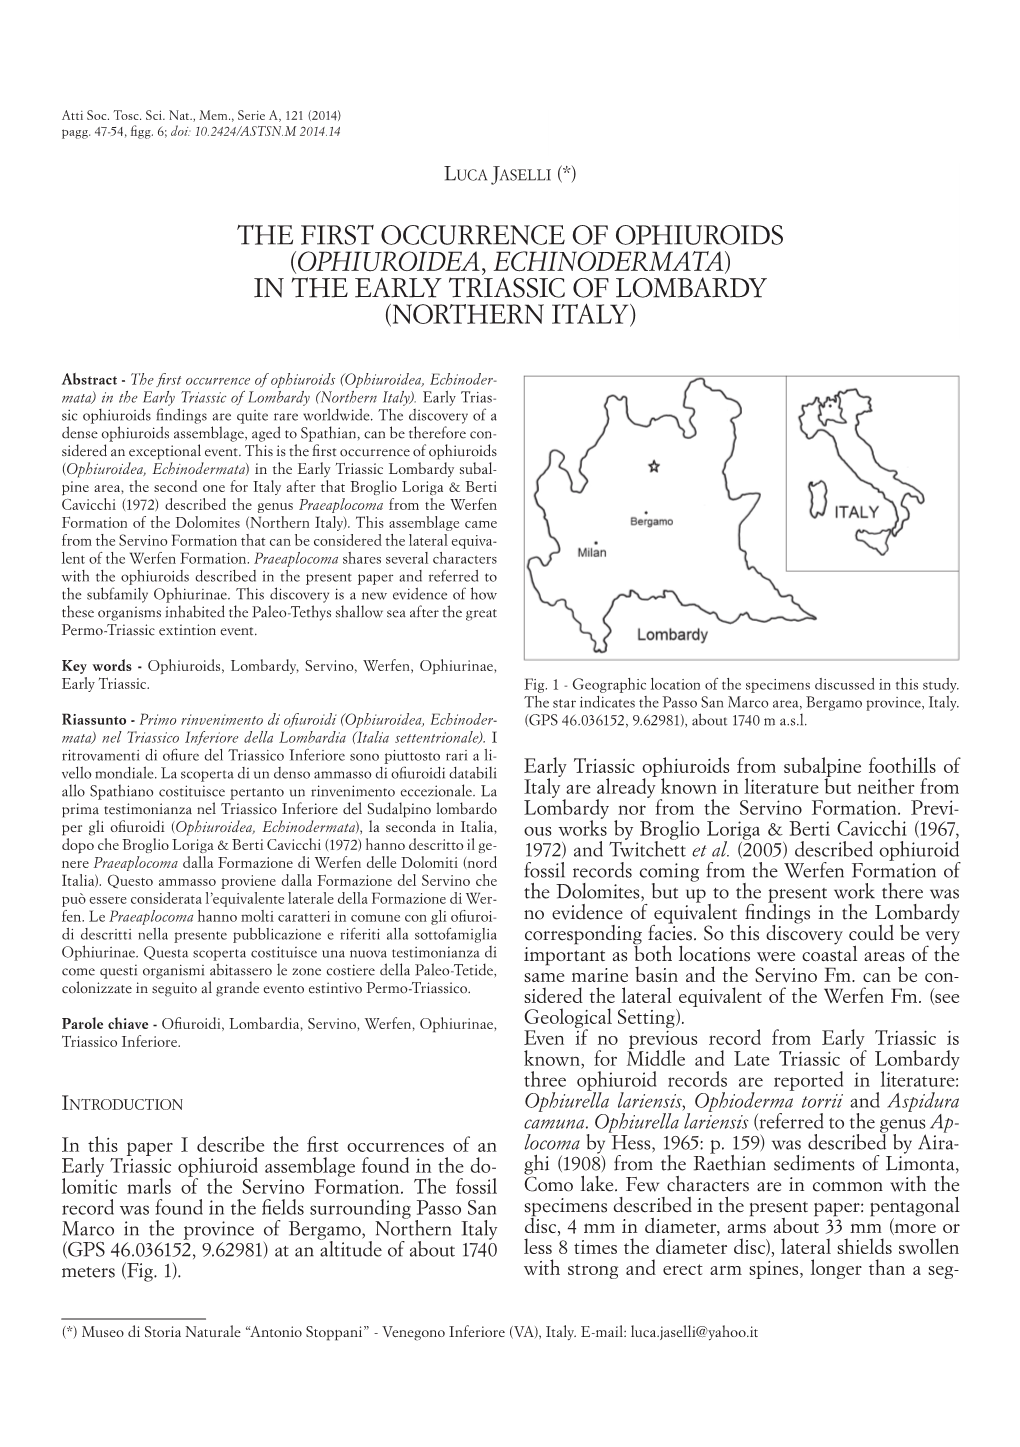 The First Occurrence of Ophiuroids (Ophiuroidea, Echinodermata) in the Early Triassic of Lombardy (Northern Italy)